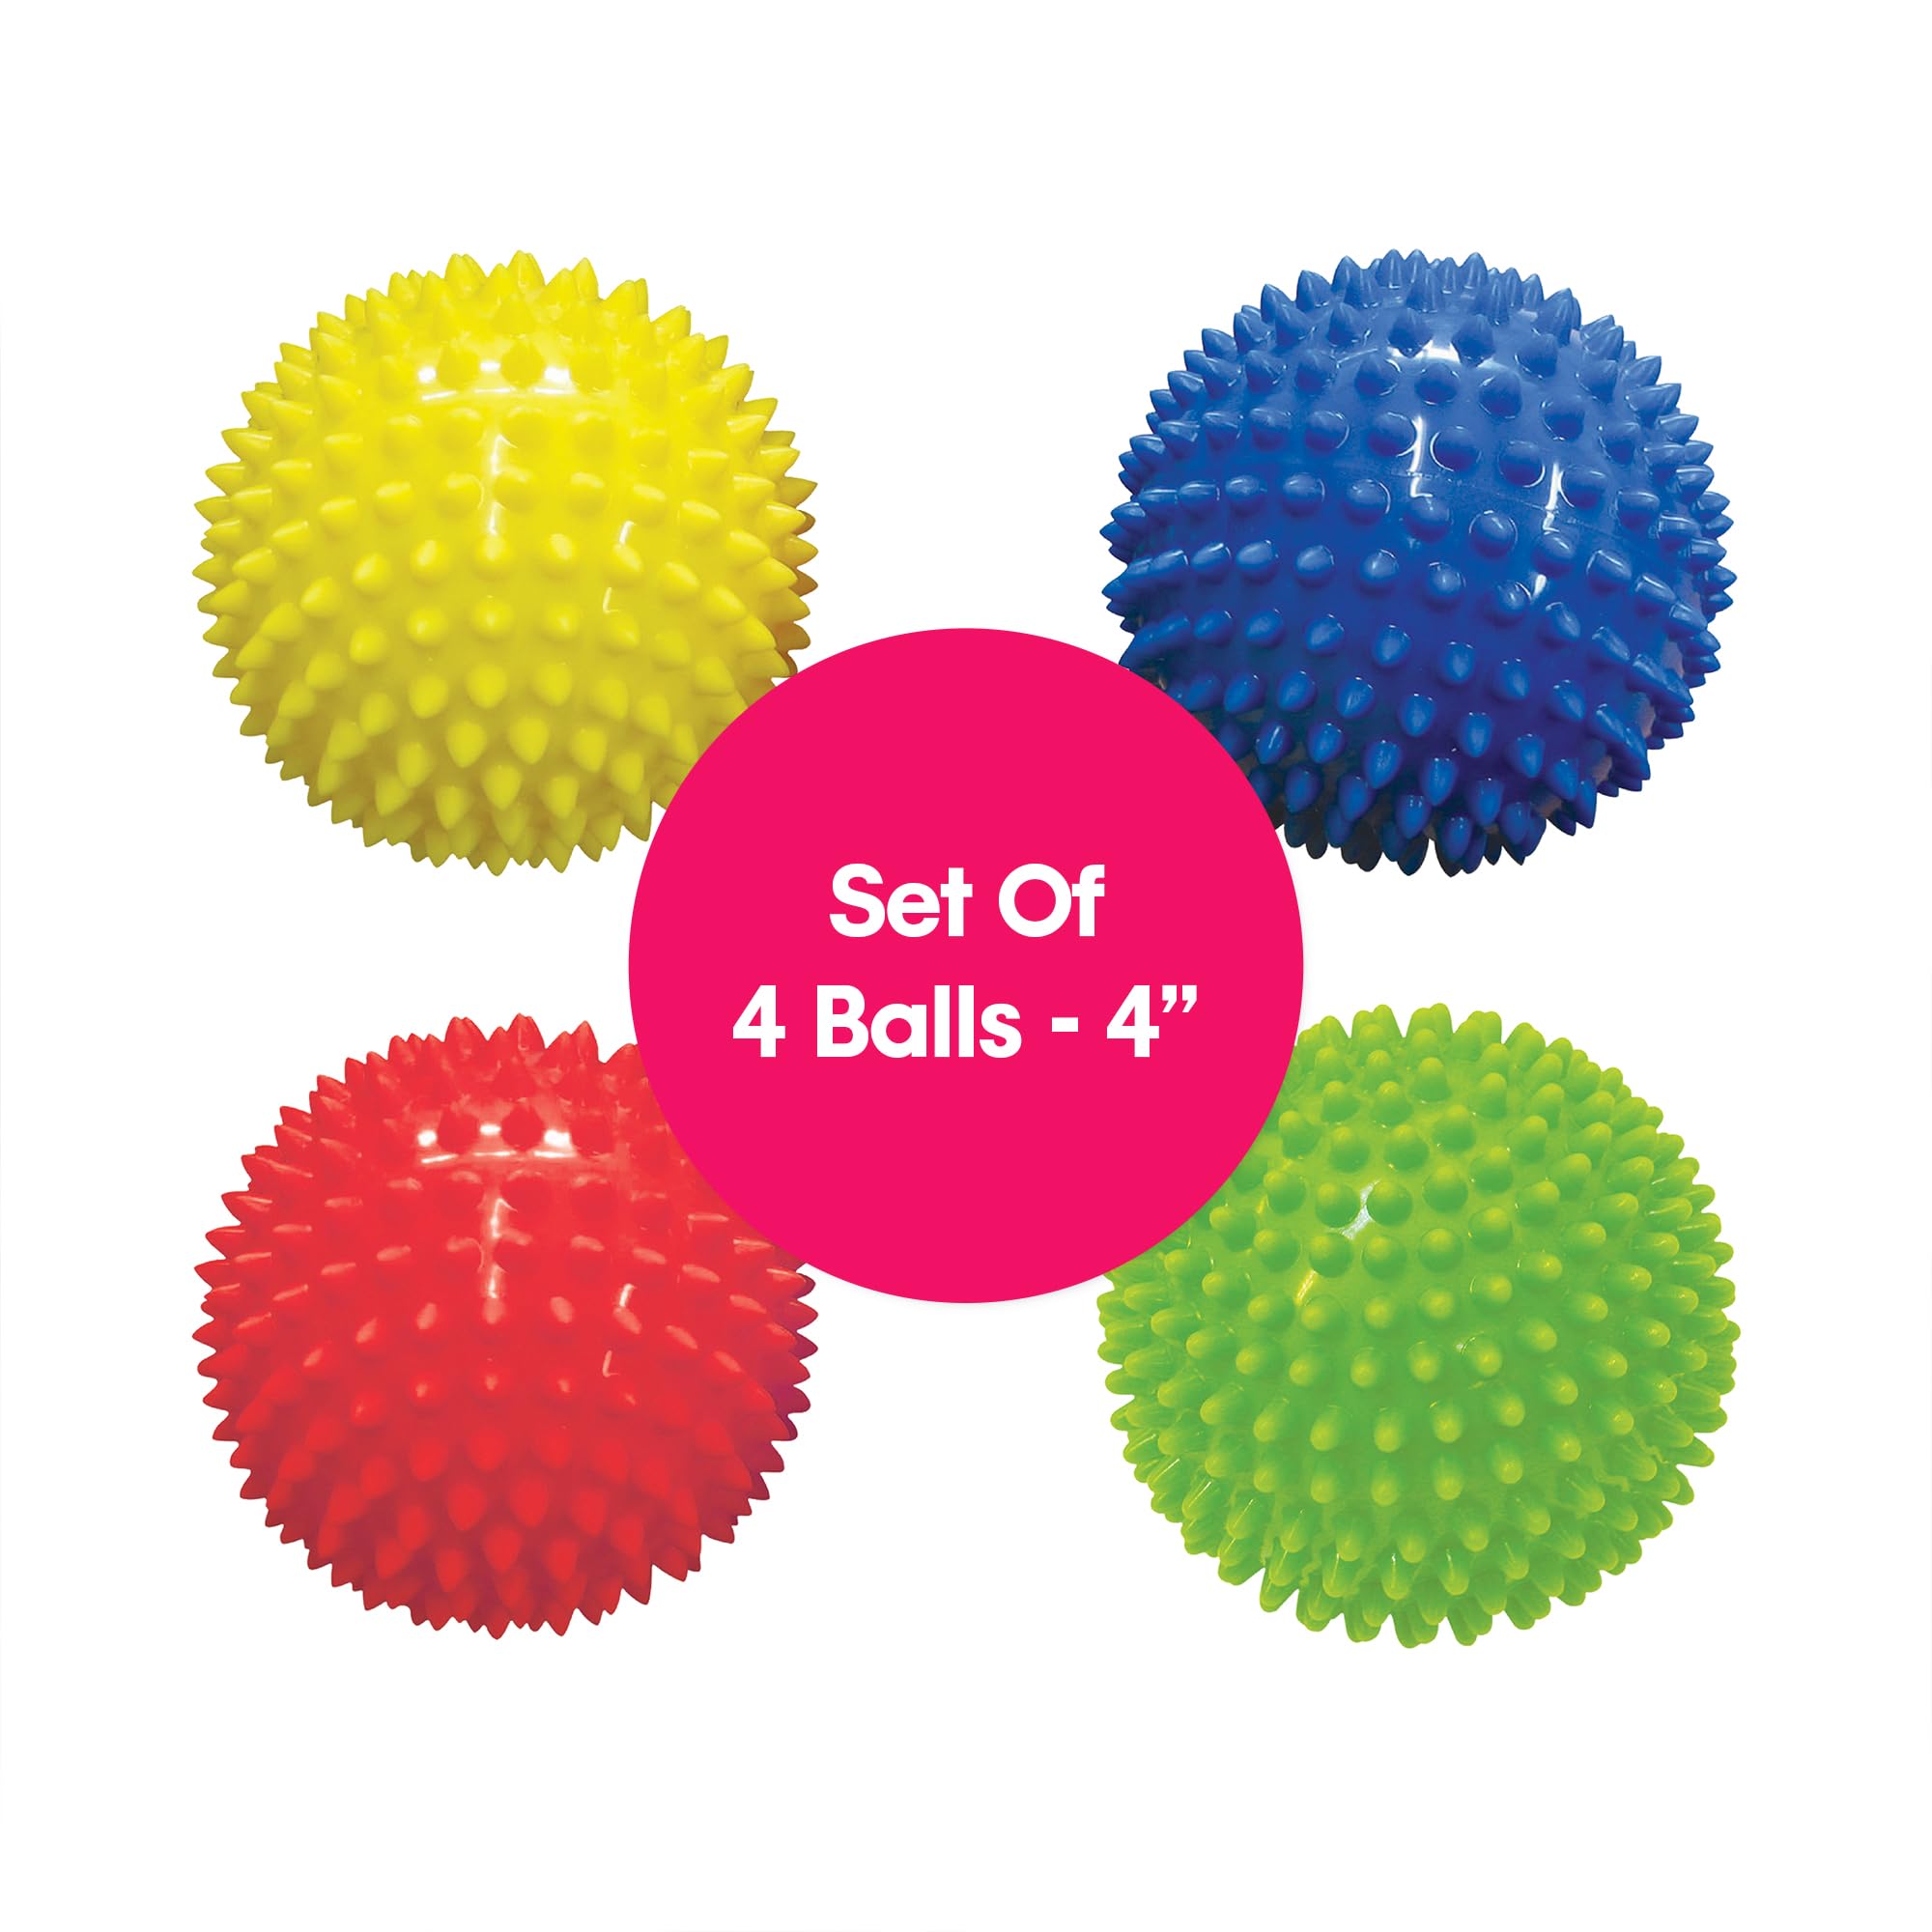 Edushape The Original Sensory Balls for Baby - 4” Solid Color Baby Balls That Help Enhance Gross Motor Skills for Kids Aged 6 Months and Up - Pack of 4 Vibrant and Unique Toddler Ball for Baby